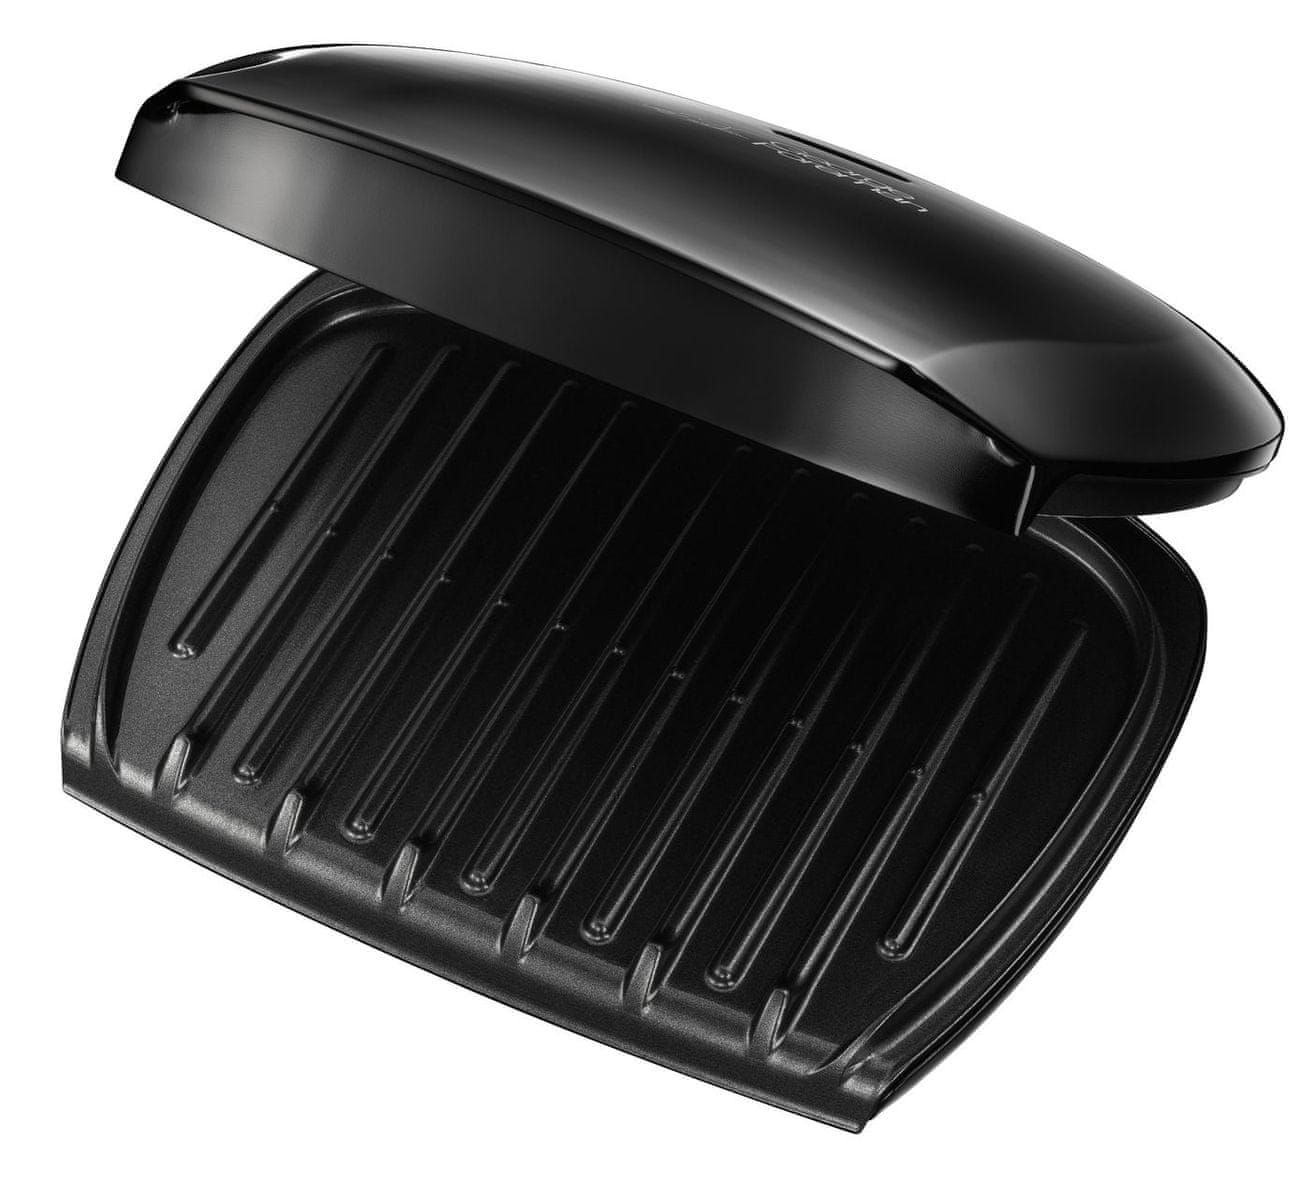 George Foreman 18874-56 Family GFX Grill